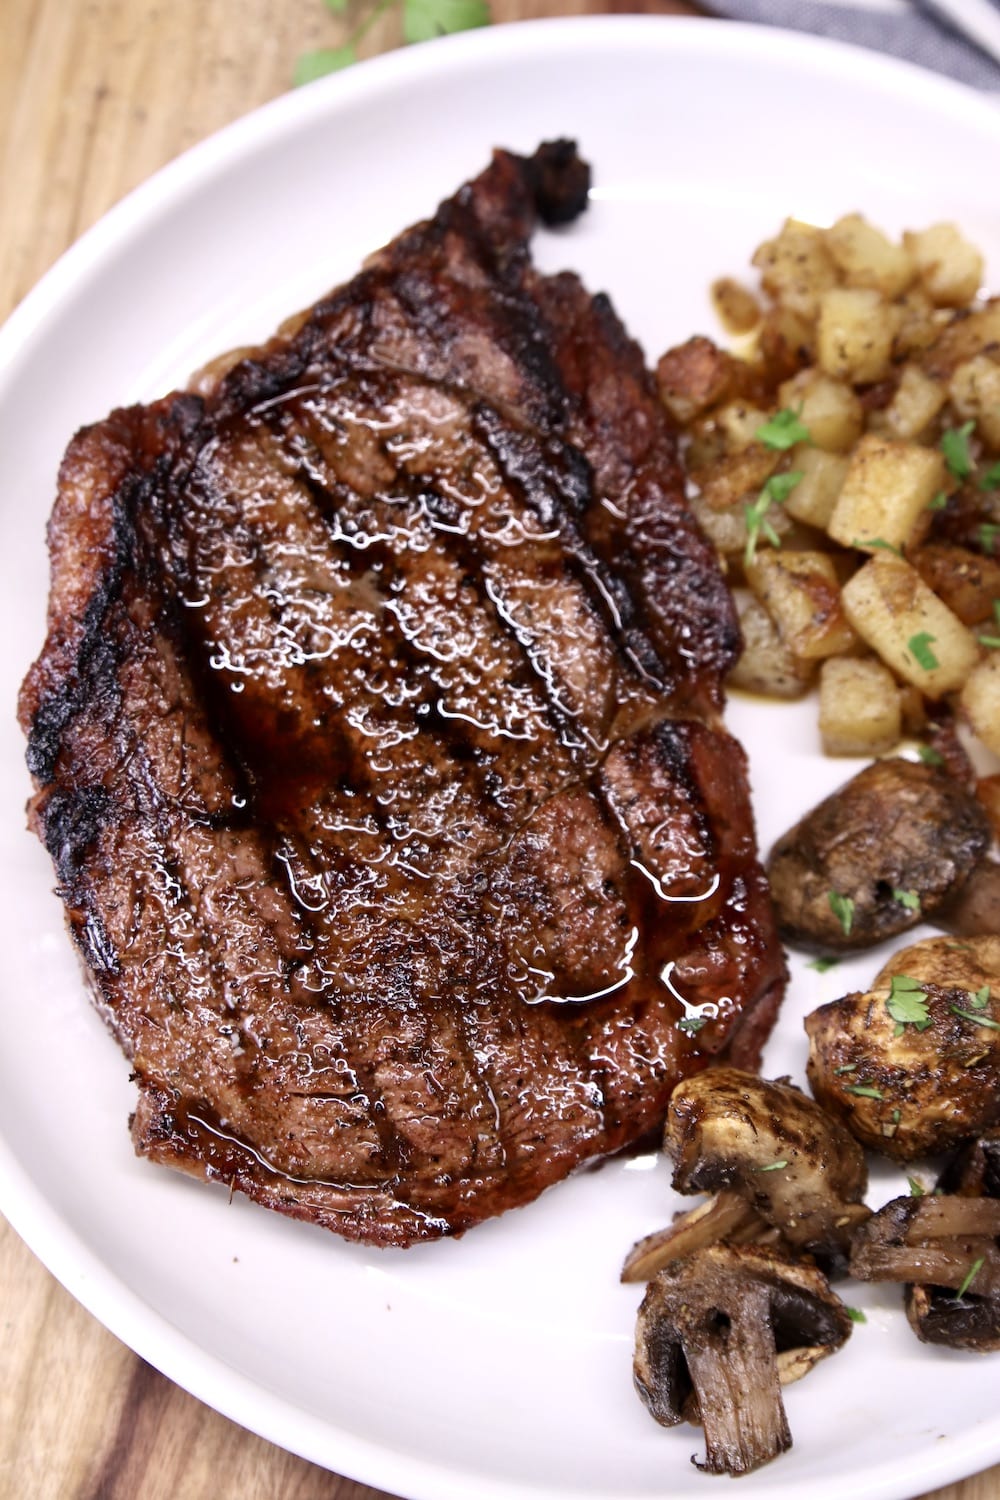 Grilled ribeye steak with potatoes and mushrooms on a plate